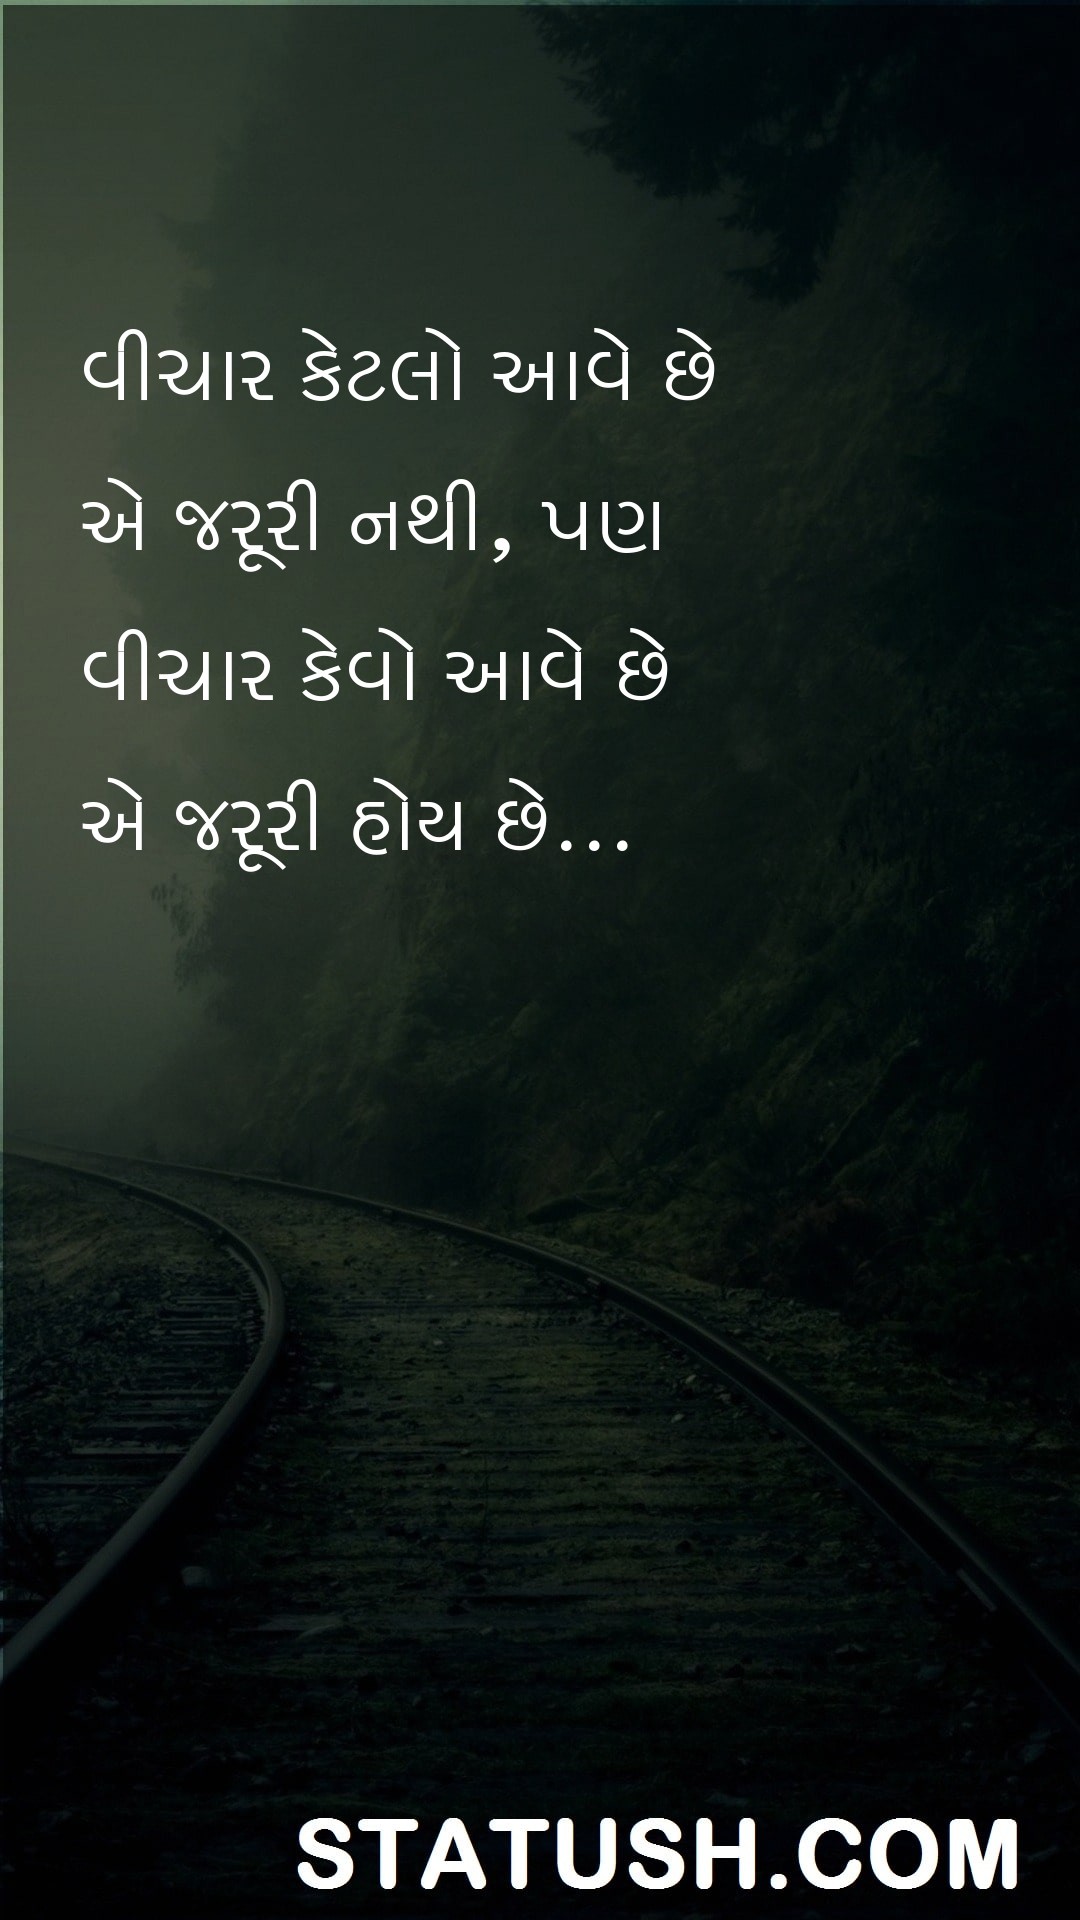 It is not necessary to know - Gujarati Quotes at statush.com